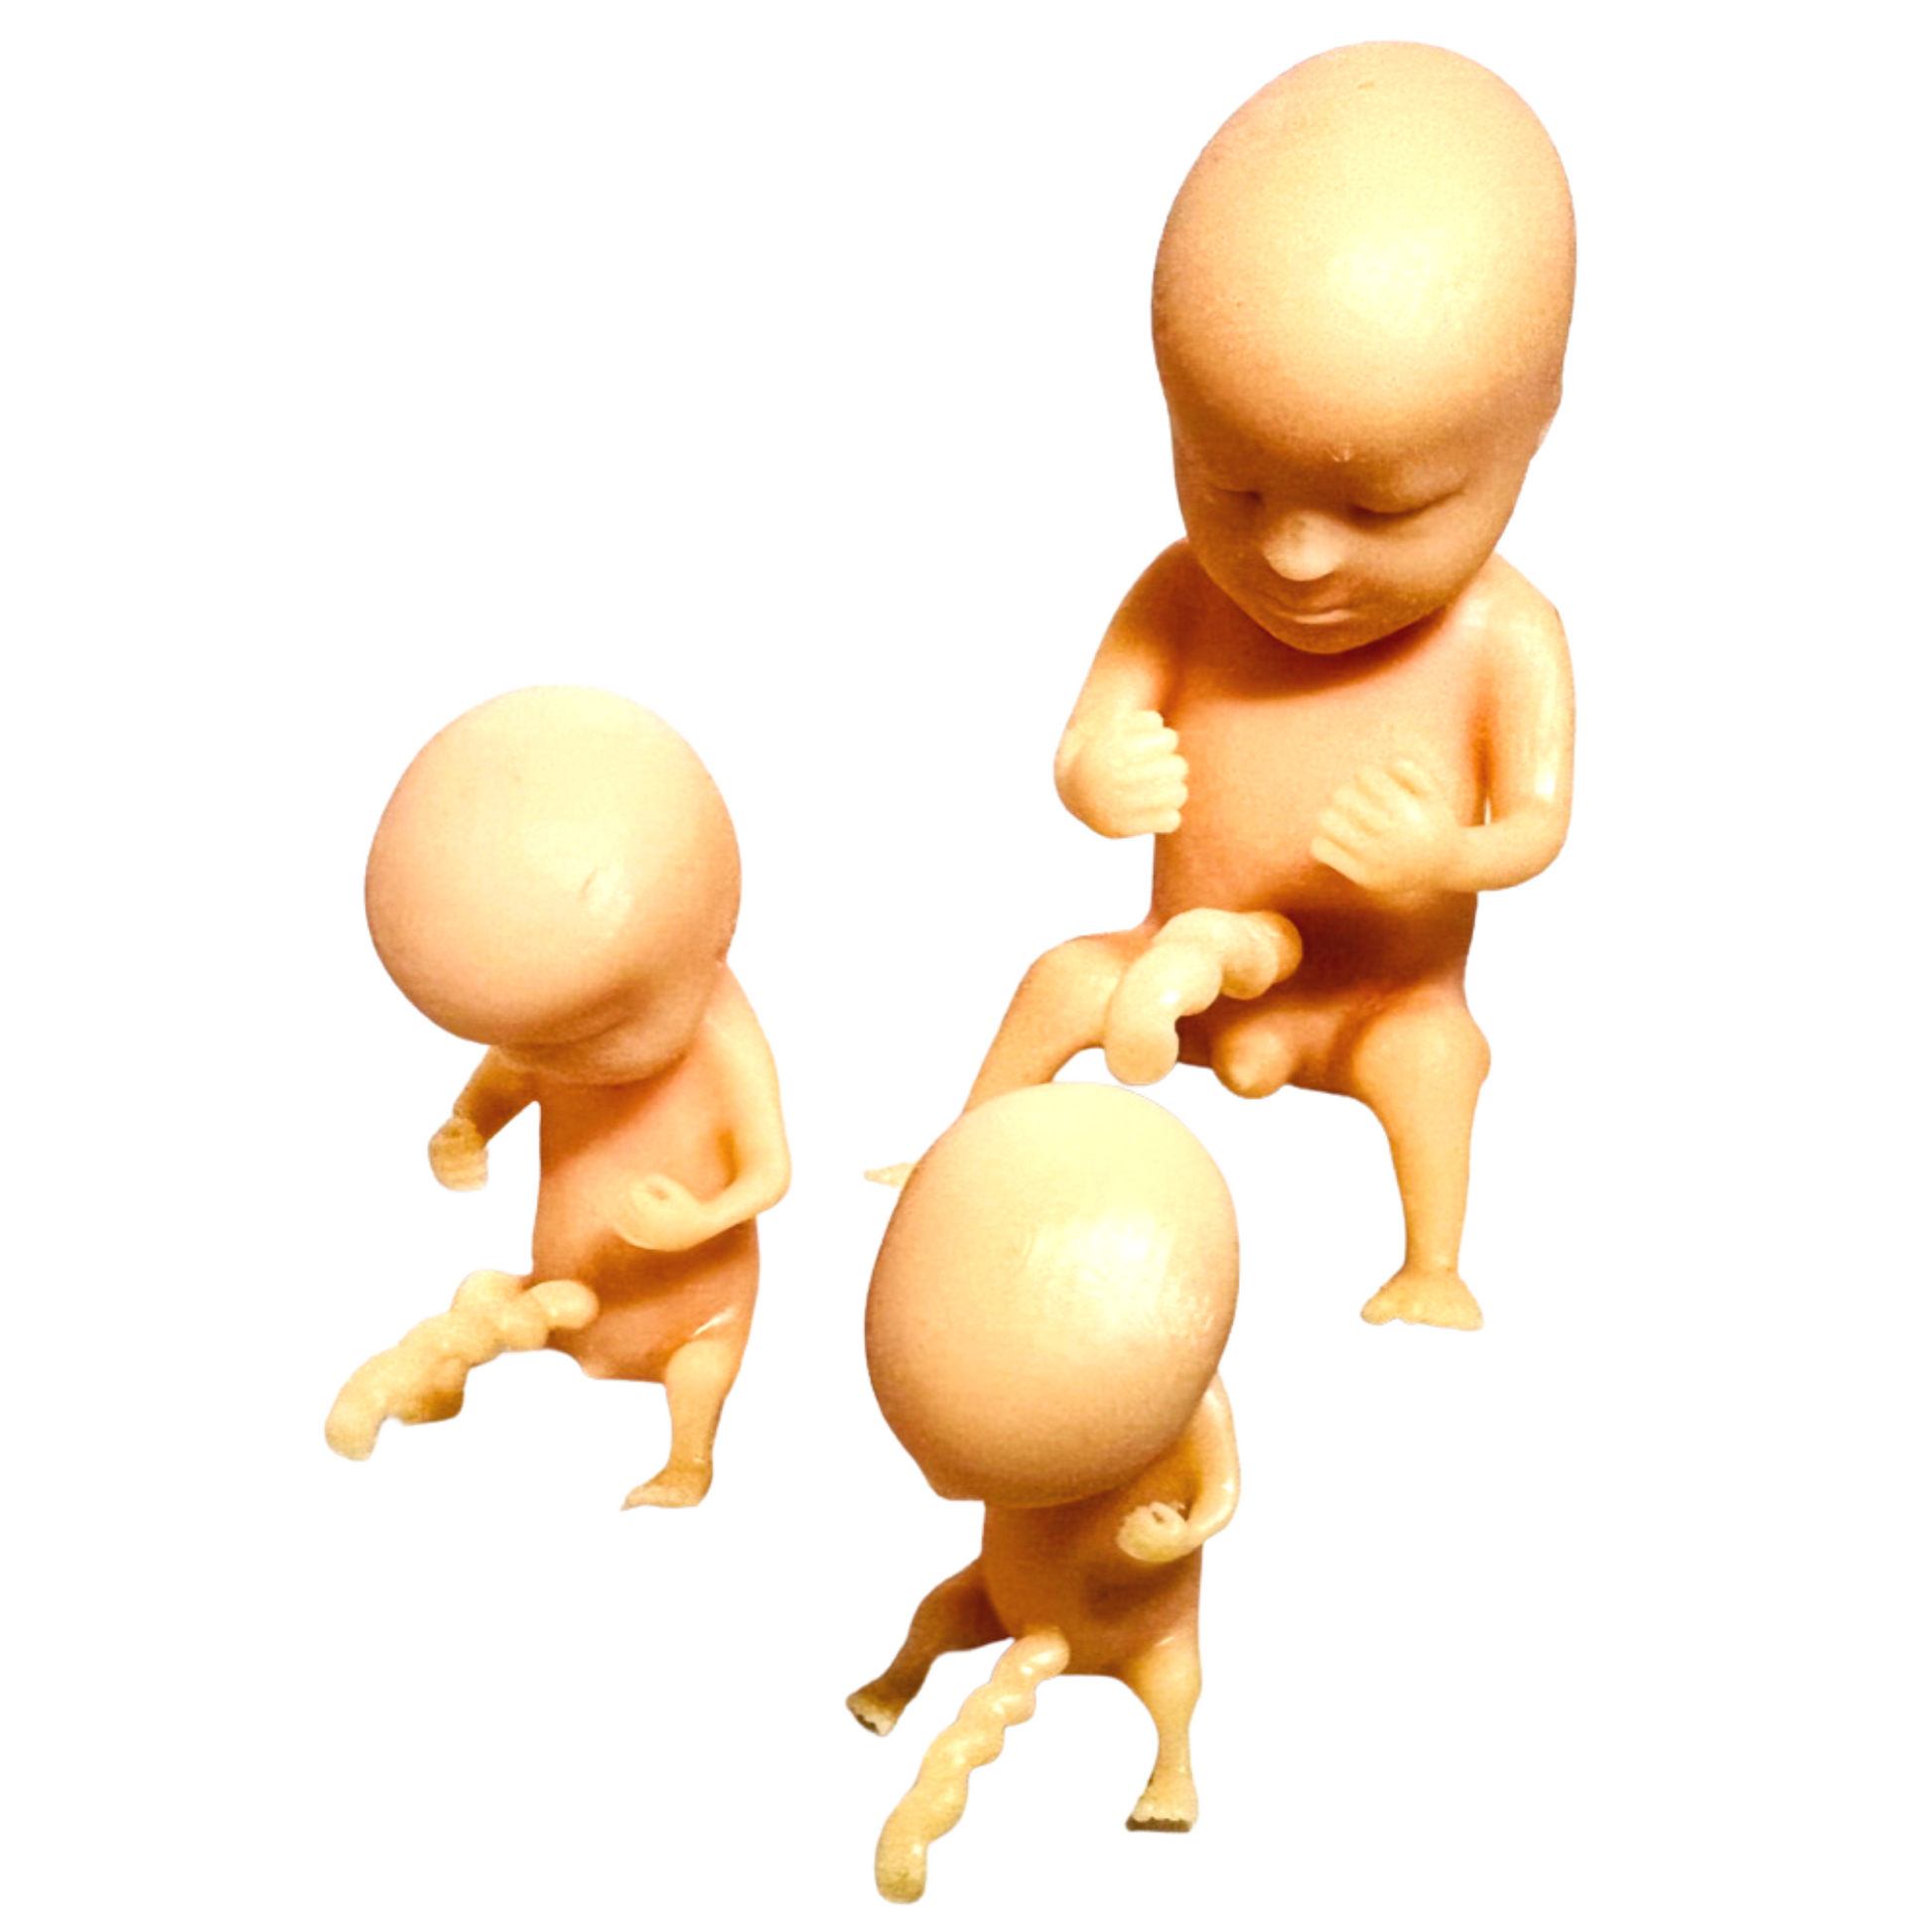 Image of 3D printed fetus models at 10,12 and 14 weeks to showcase fetal development